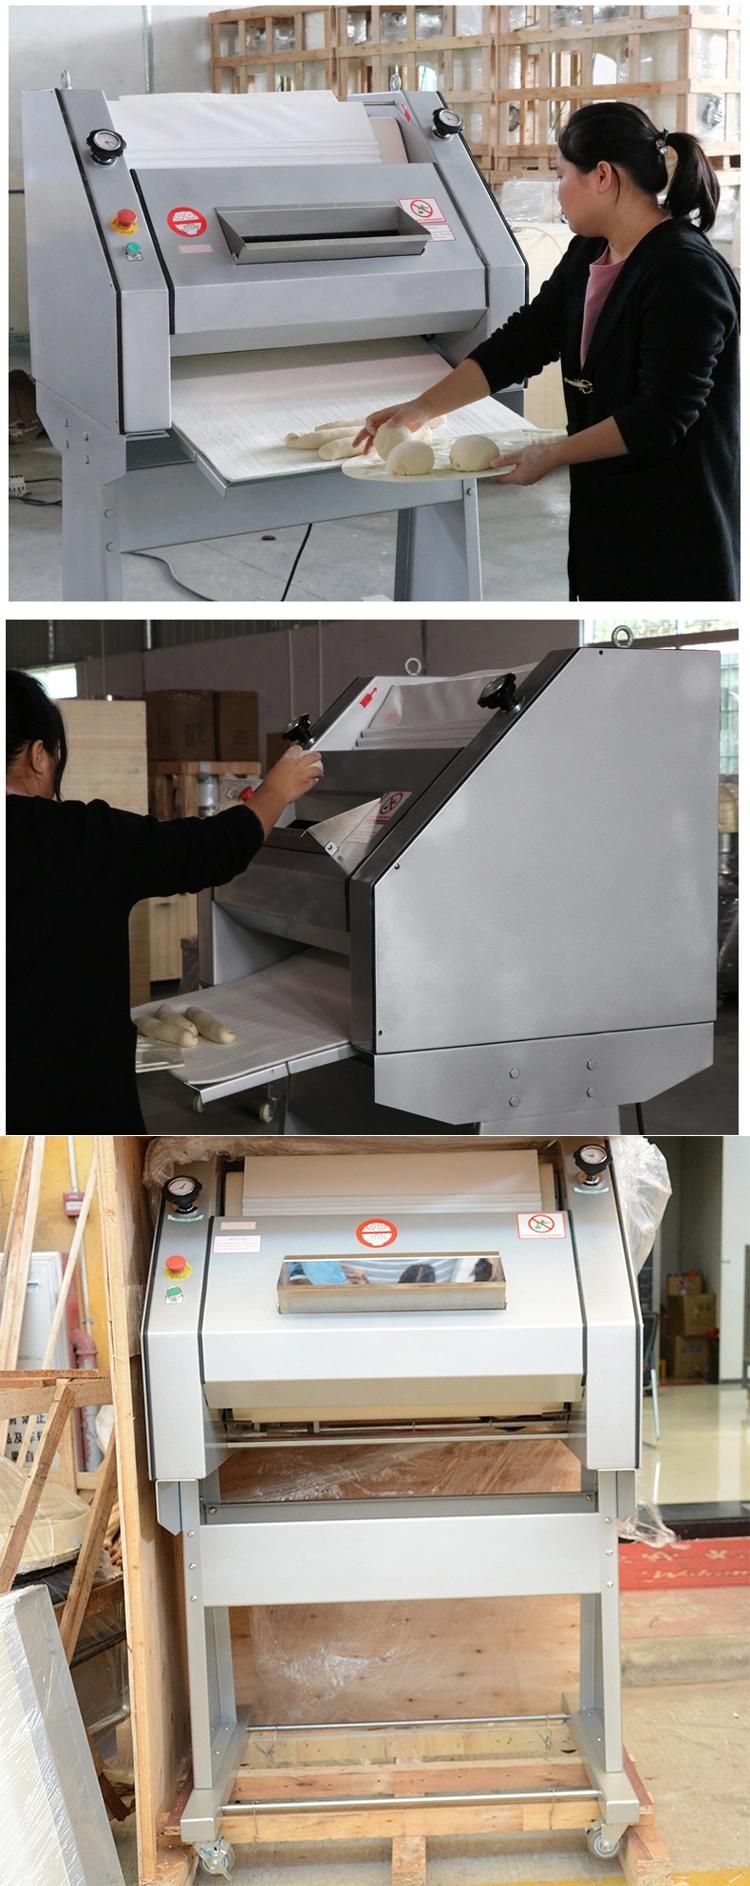 Commercial French Baguette Bread Making Machine Toast Bread Machine French Bread Making Machine